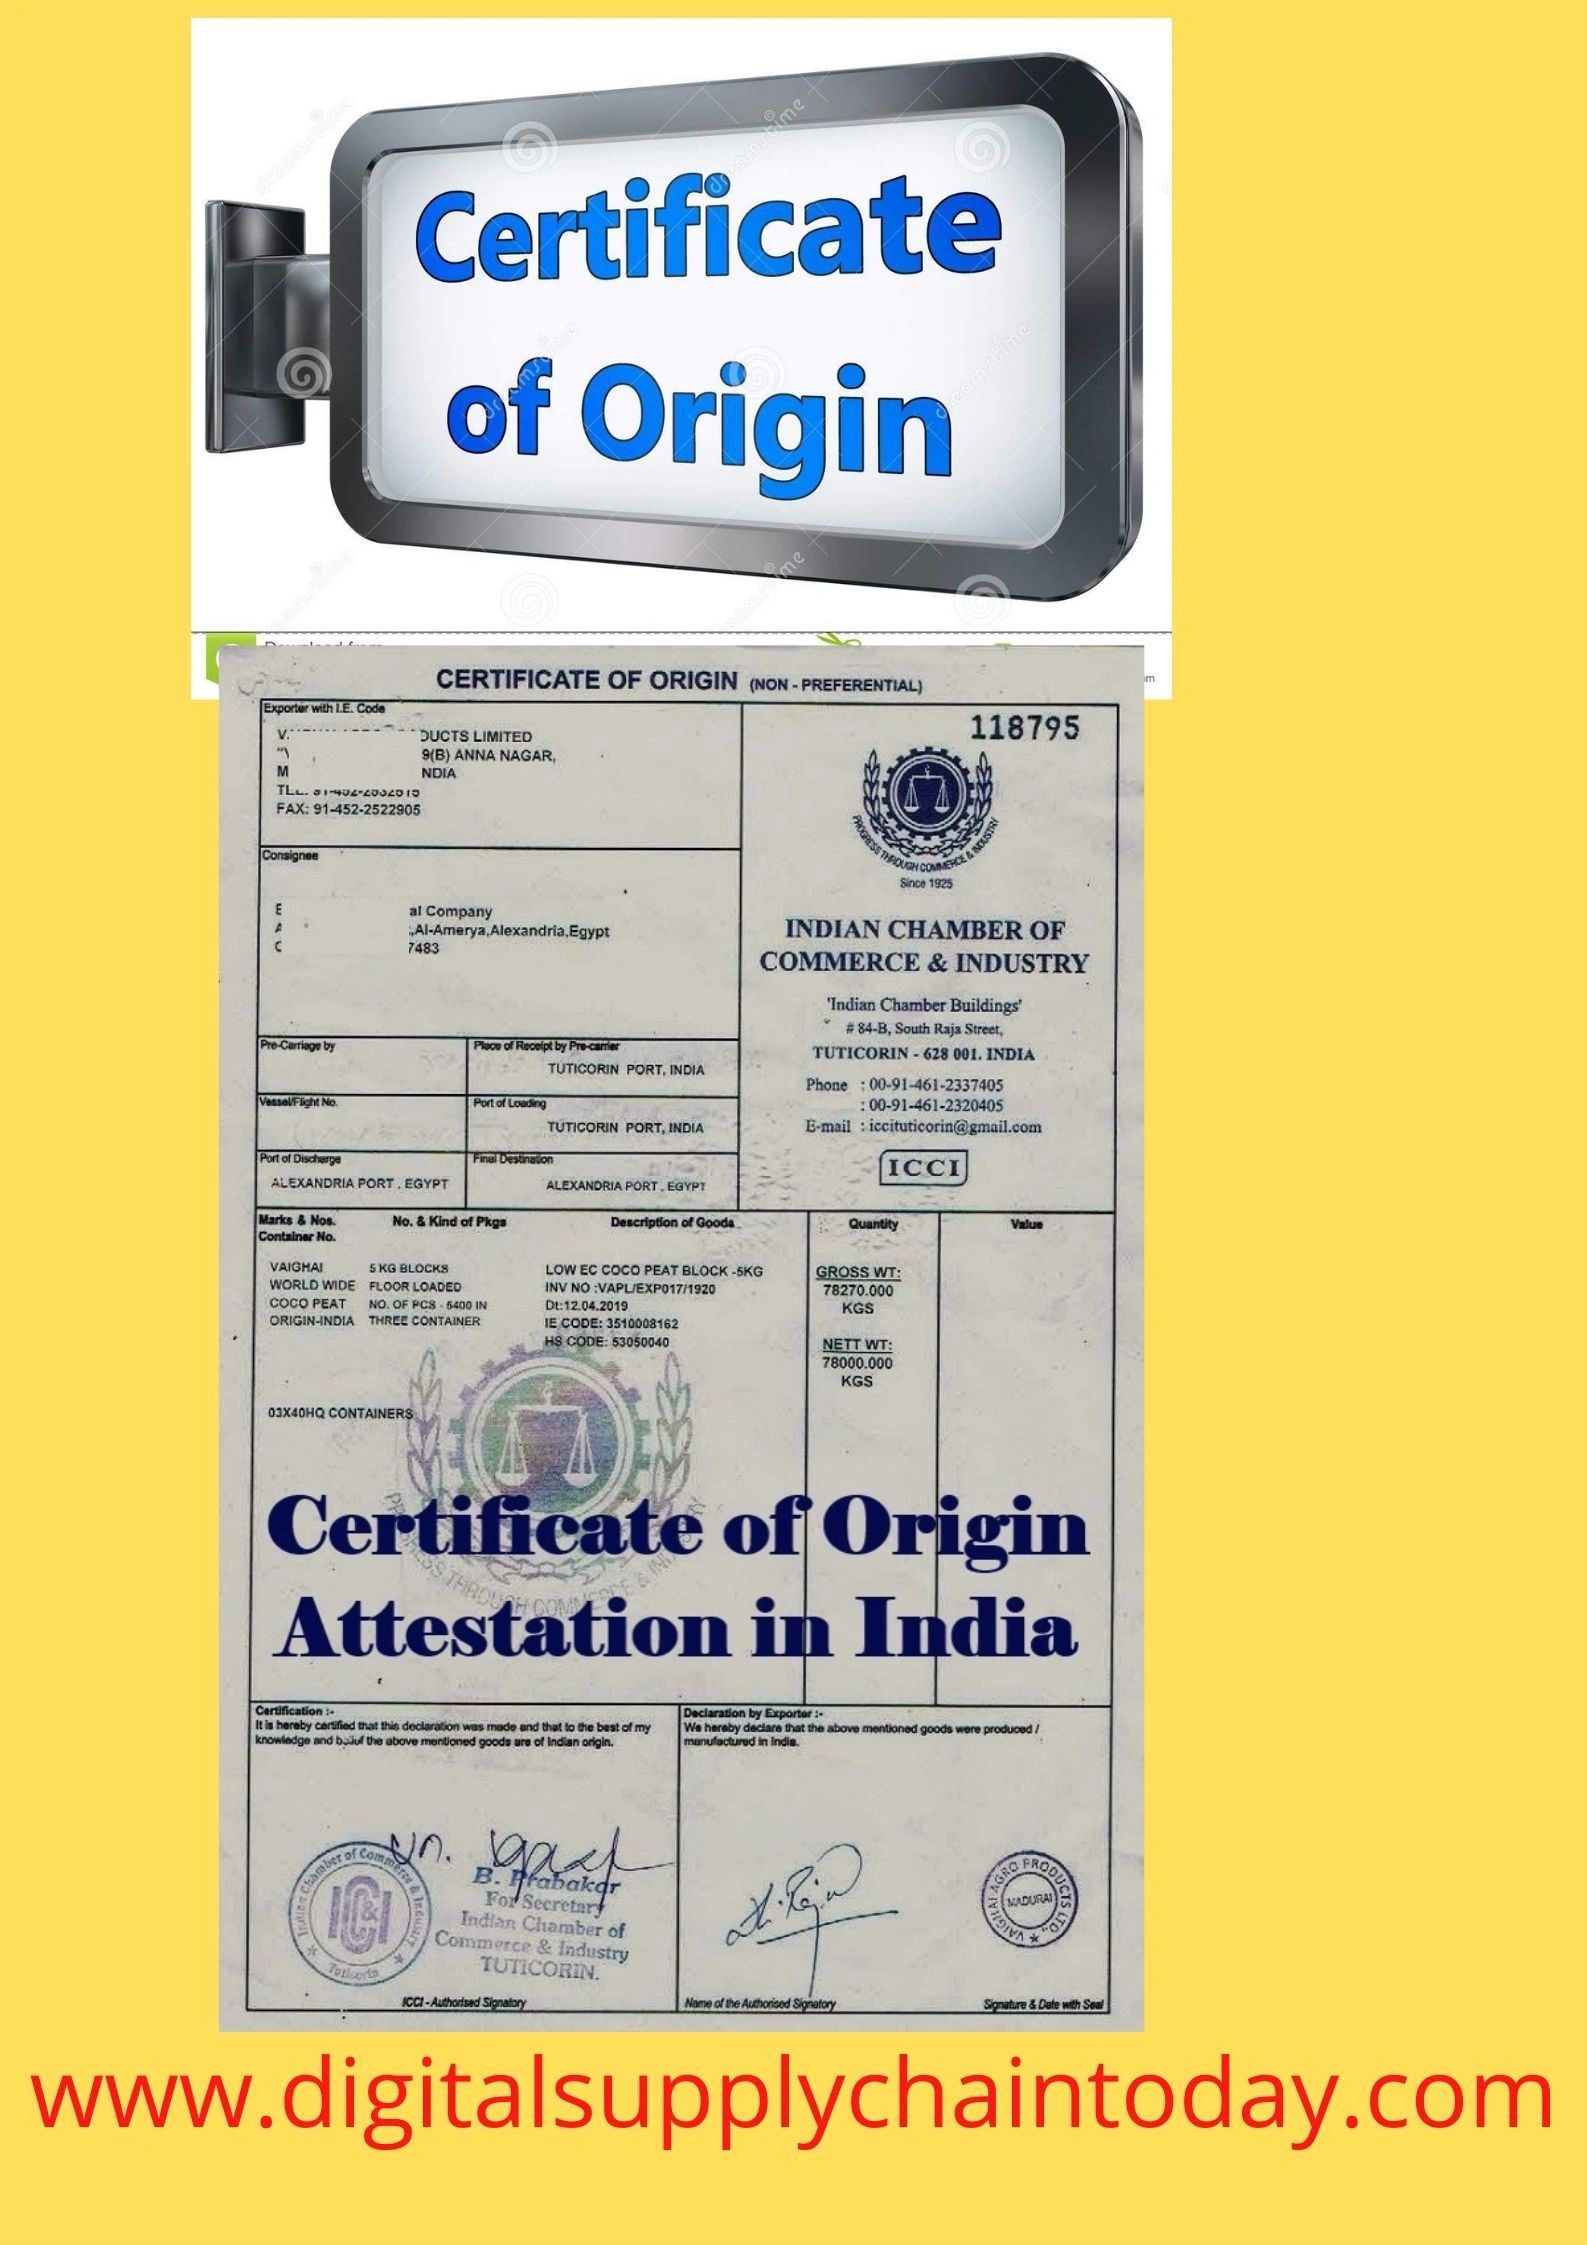 What is Certificate of Origin(COO)?